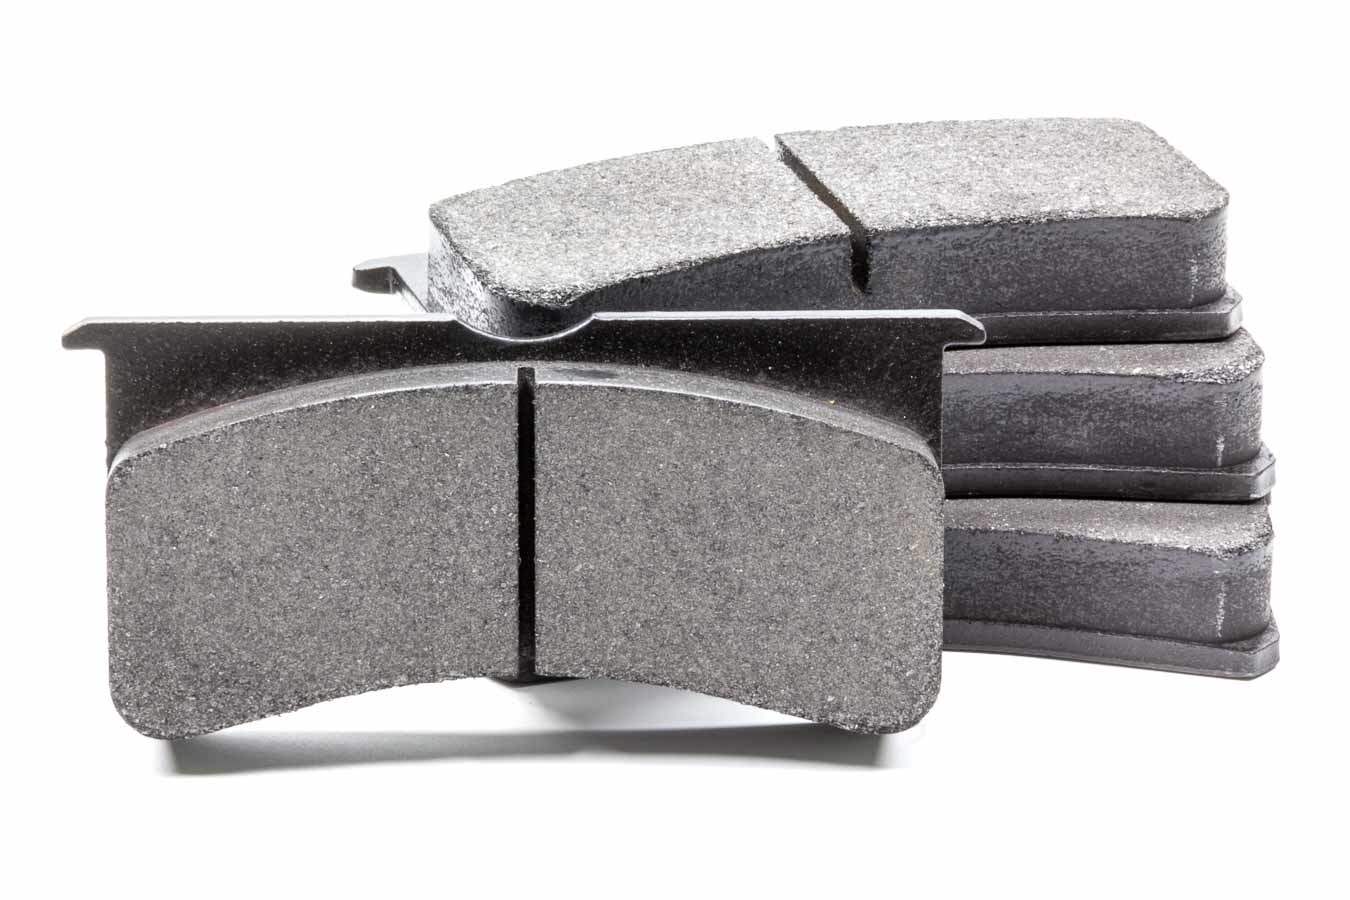 AFCO Racing Products 6651022 Brake Pads, SR34 Compound, Wide Temperature Range, F88 / SL Calipers, Kit